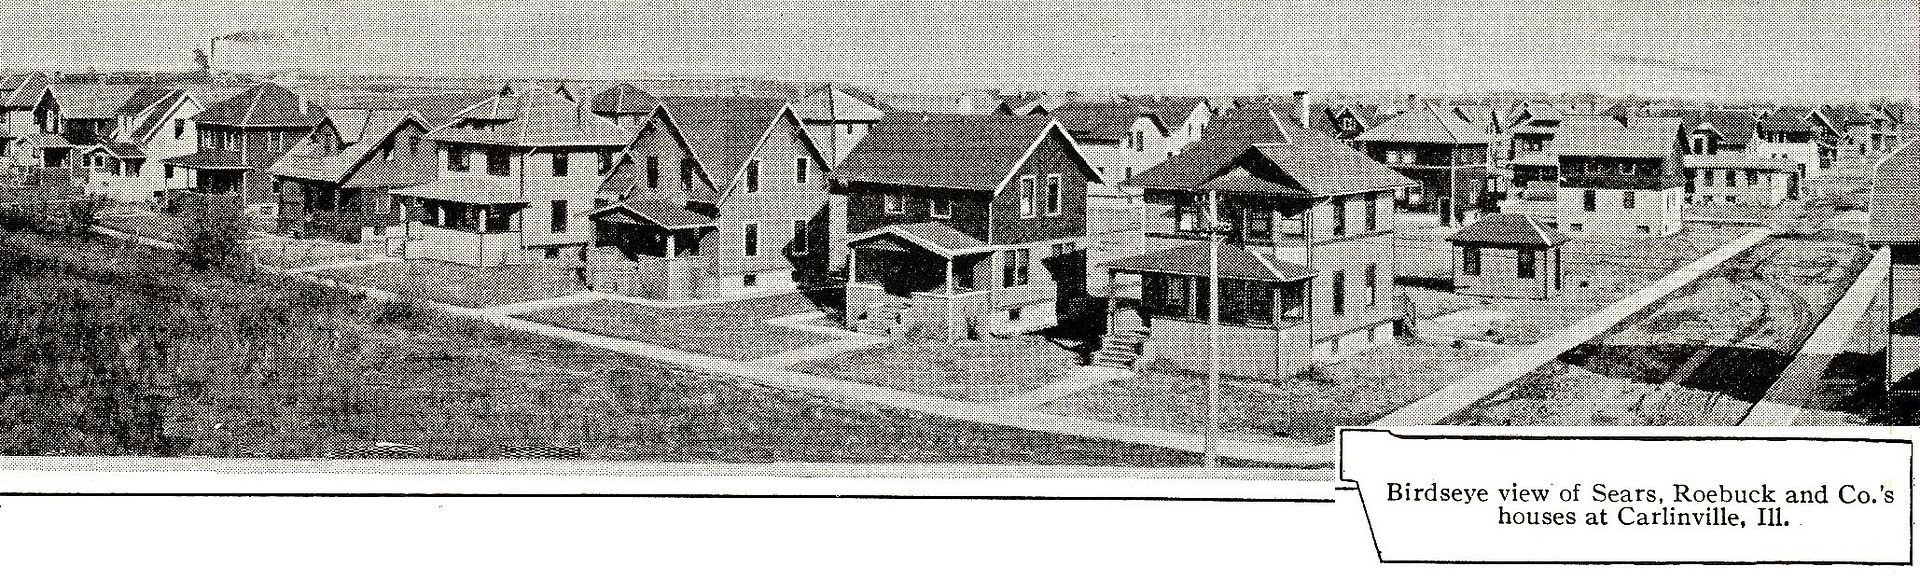 In 1921, images of the completed neighborhood first appeared in the Searsm Modern Homes catalog. 